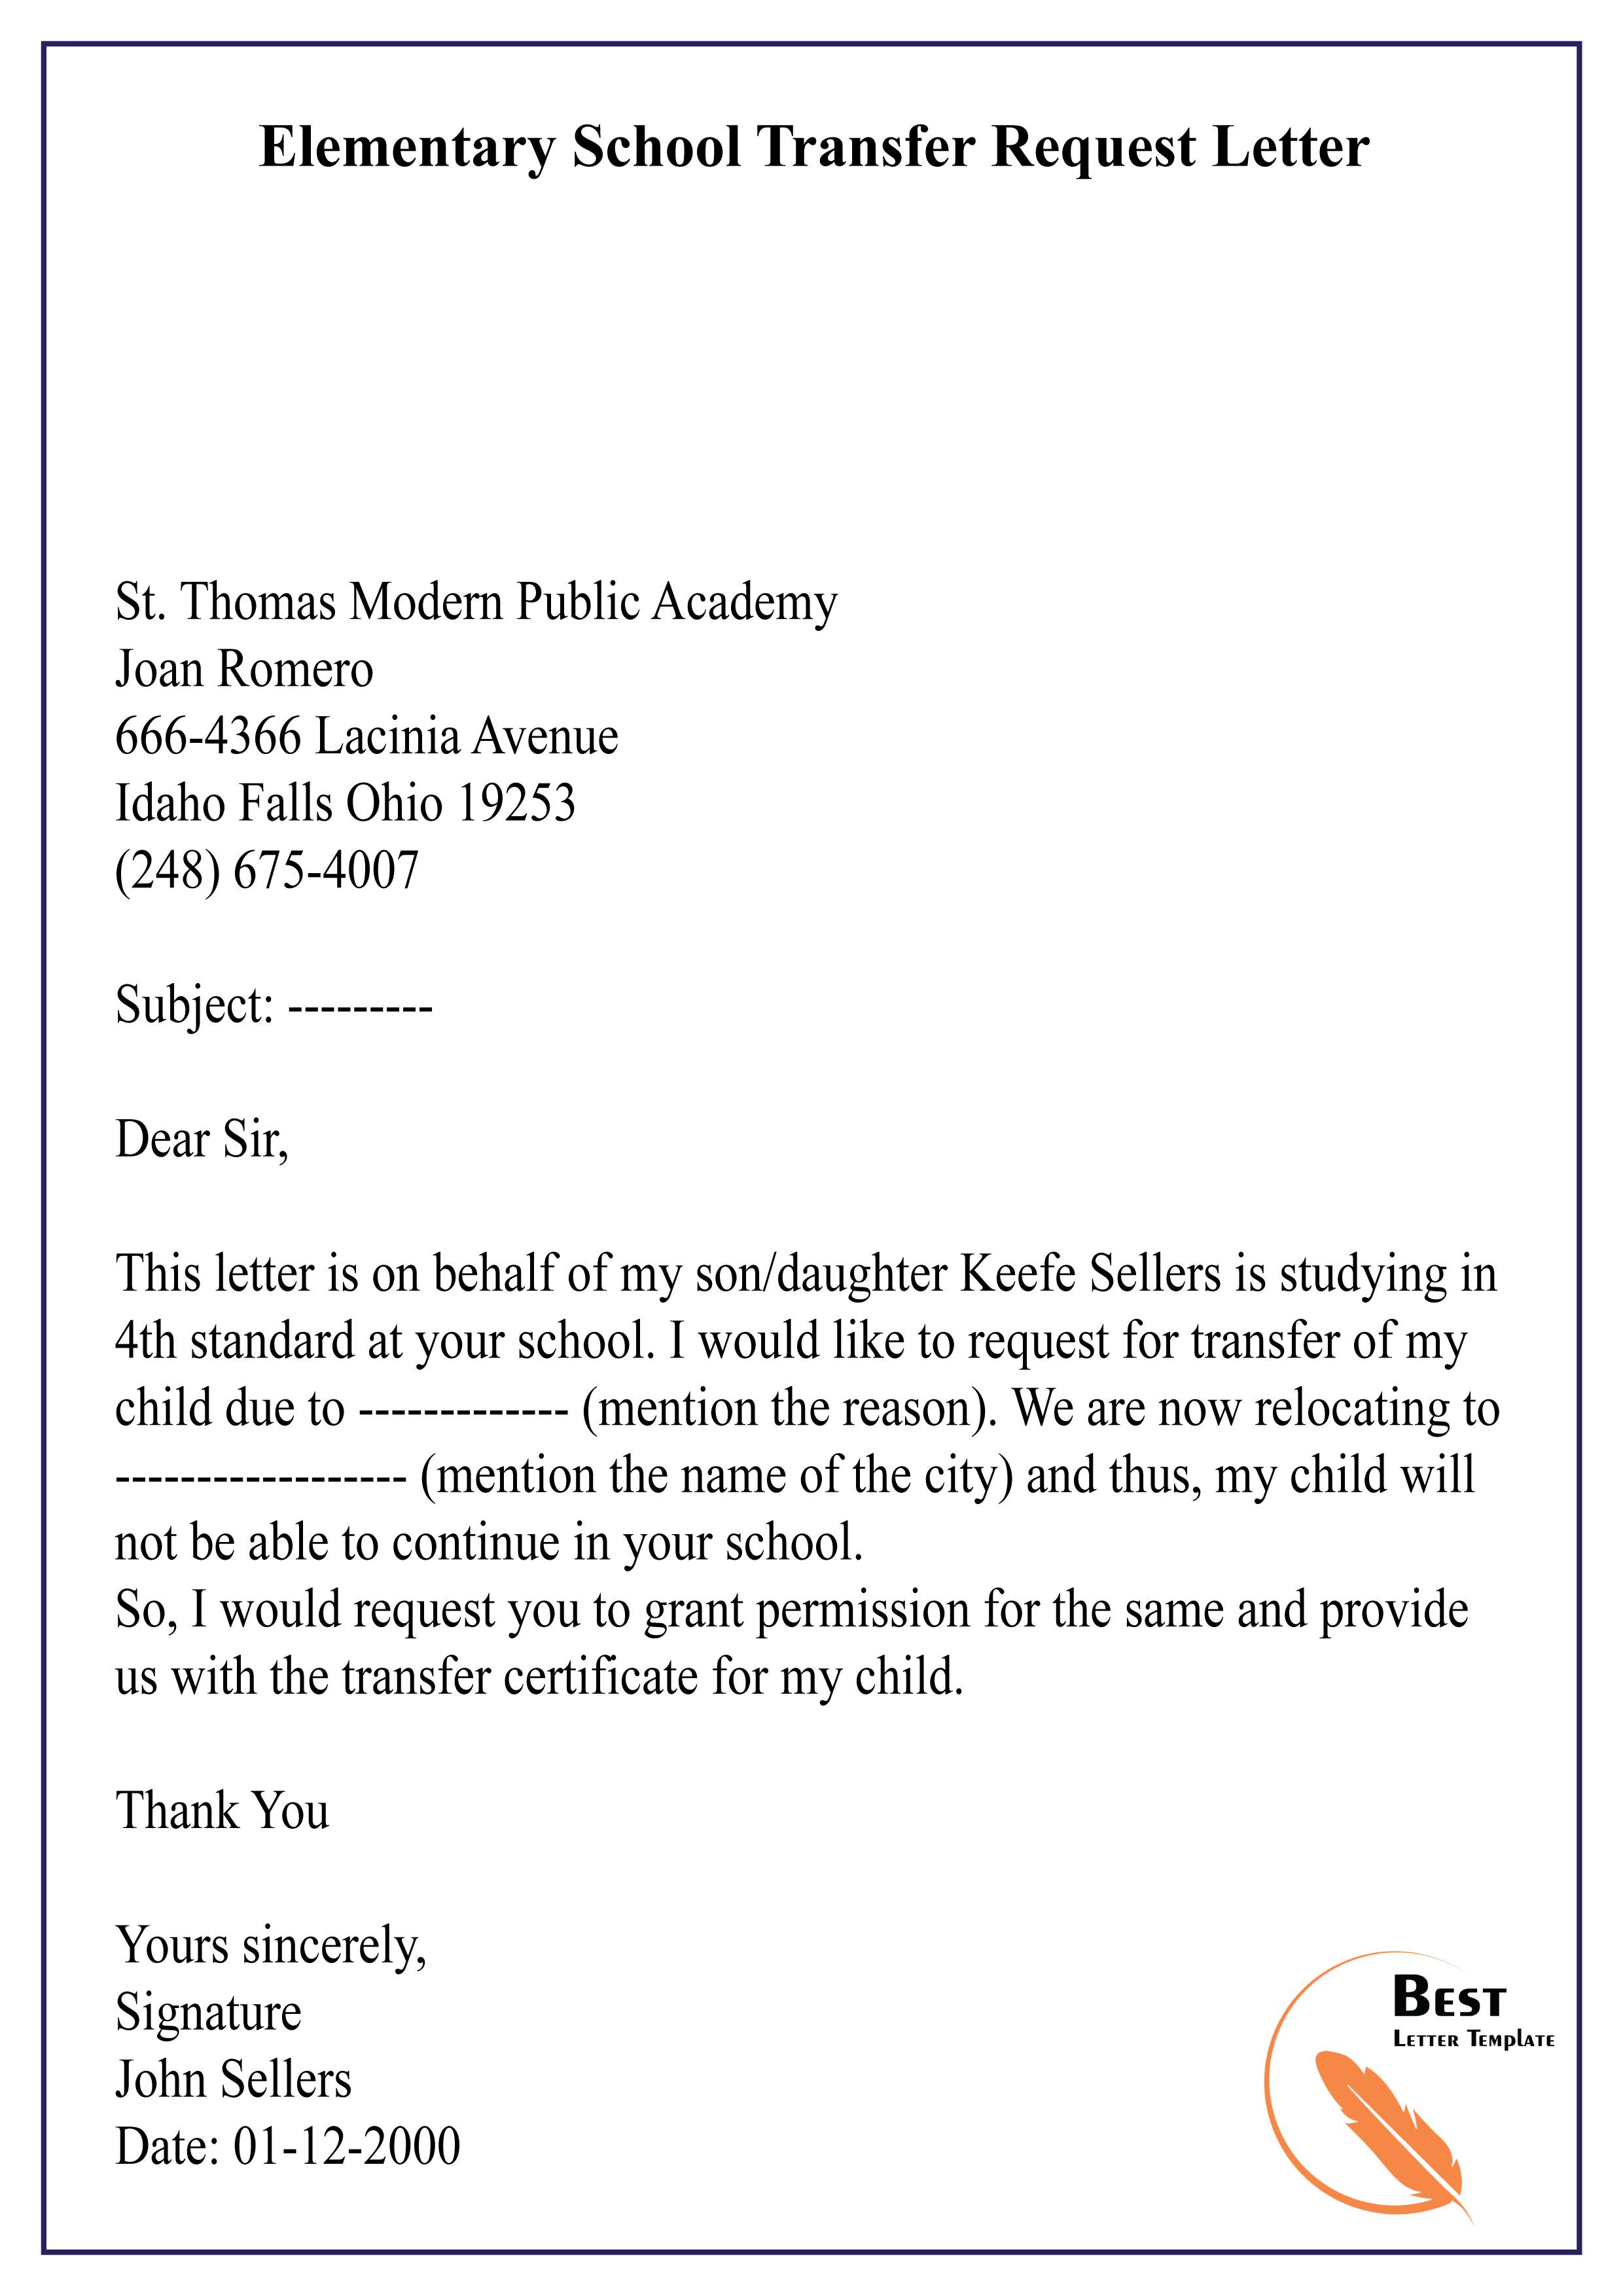 Transfer Request Letter Example from bestlettertemplate.com